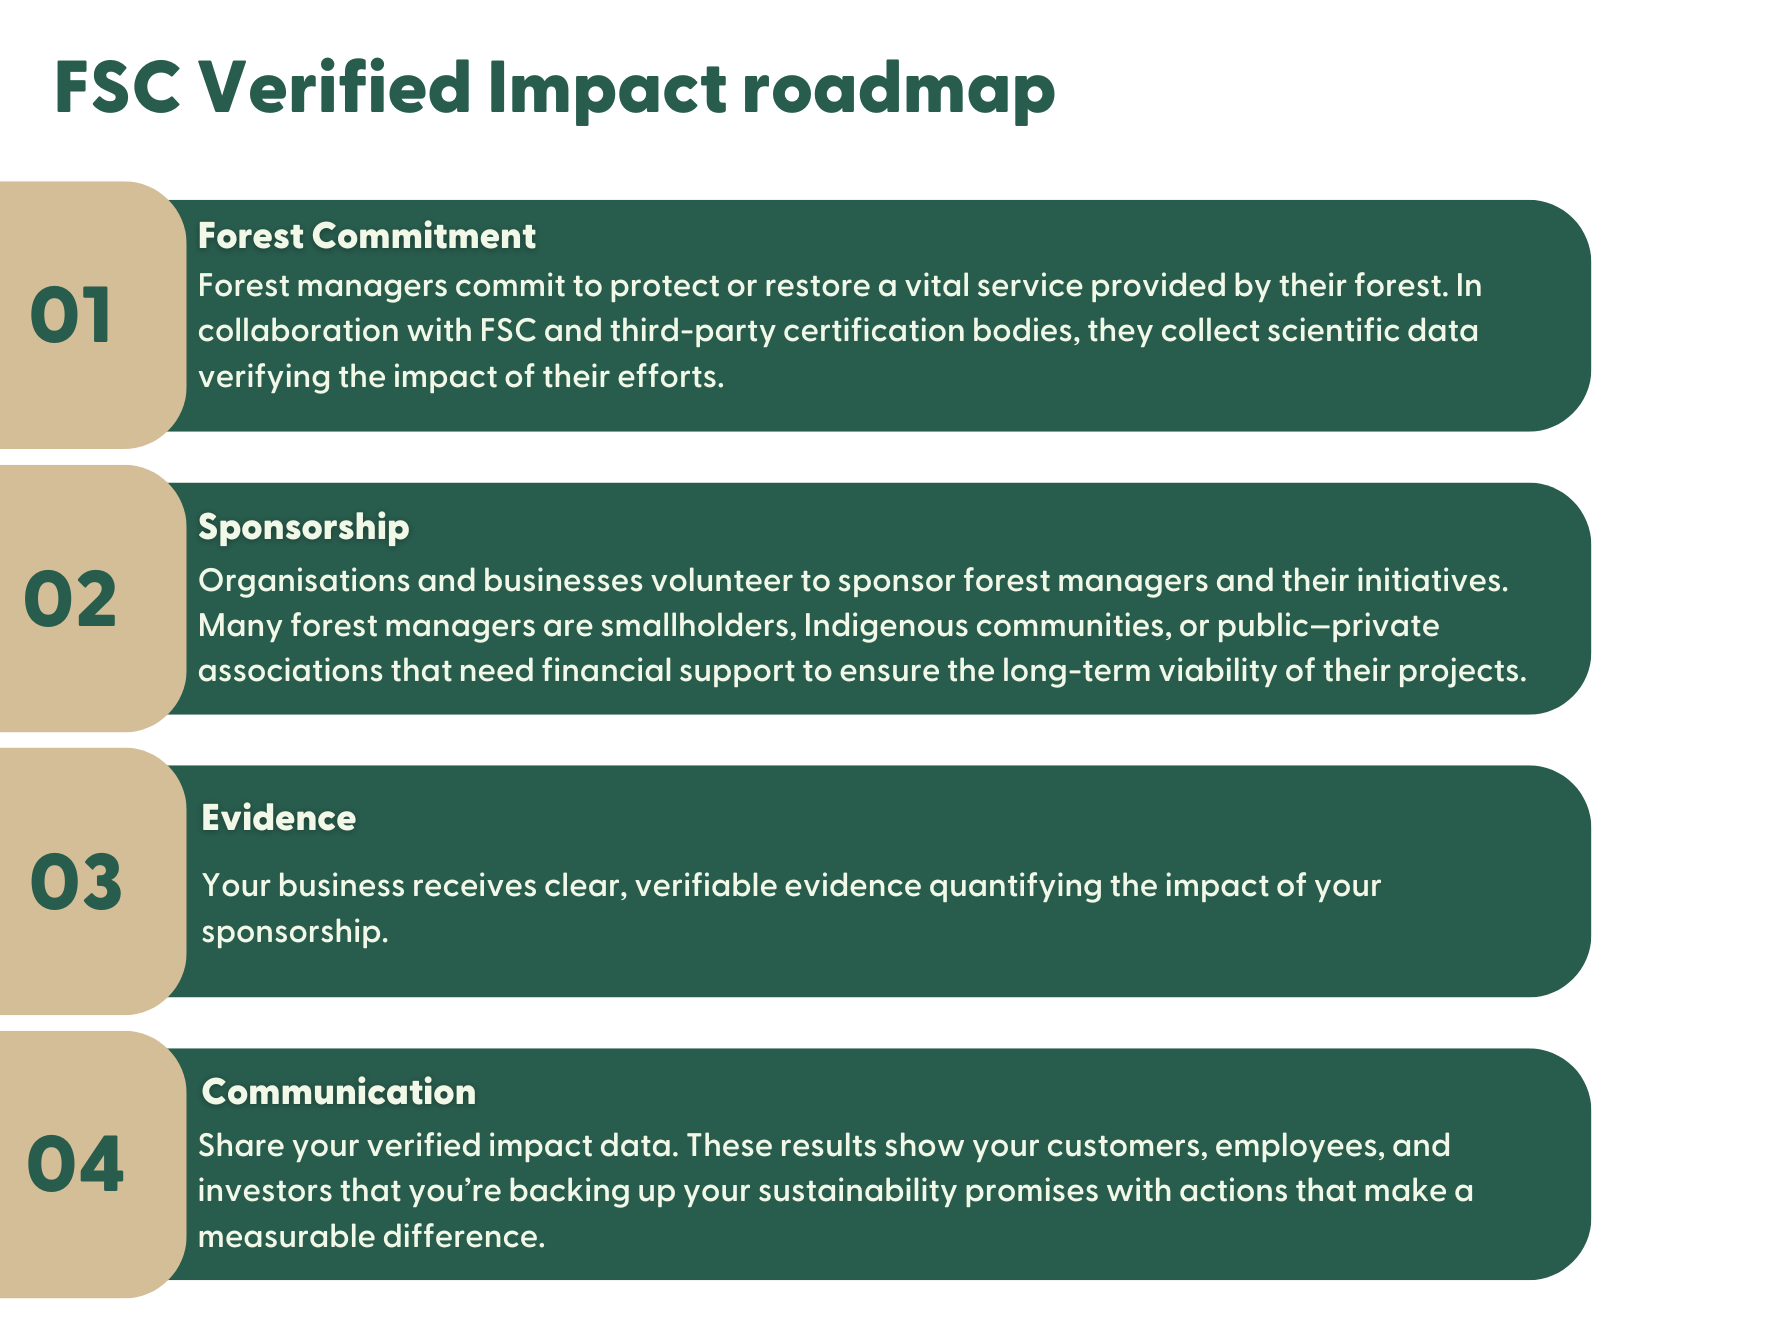 FSC Verified Impact Roadmap. 1 - Forest Managers commit to protect or restore vital ecosystem services. In collaboration with FSC and third-party certification bodies, they collect scientific data verifying the impact of their efforts.2 – and businesses volunteer to sponsor forest managers and their initiatives that need financial support to ensure the long-term viability of their projects. 3 -Your business receives clear, verifiable evidence quantifying the impact of your sponsorship. 4 - Share your verified impact data. These results show your customers, employees, and investors that you’re backing up your sustainability promises with actions that make a measurable difference.